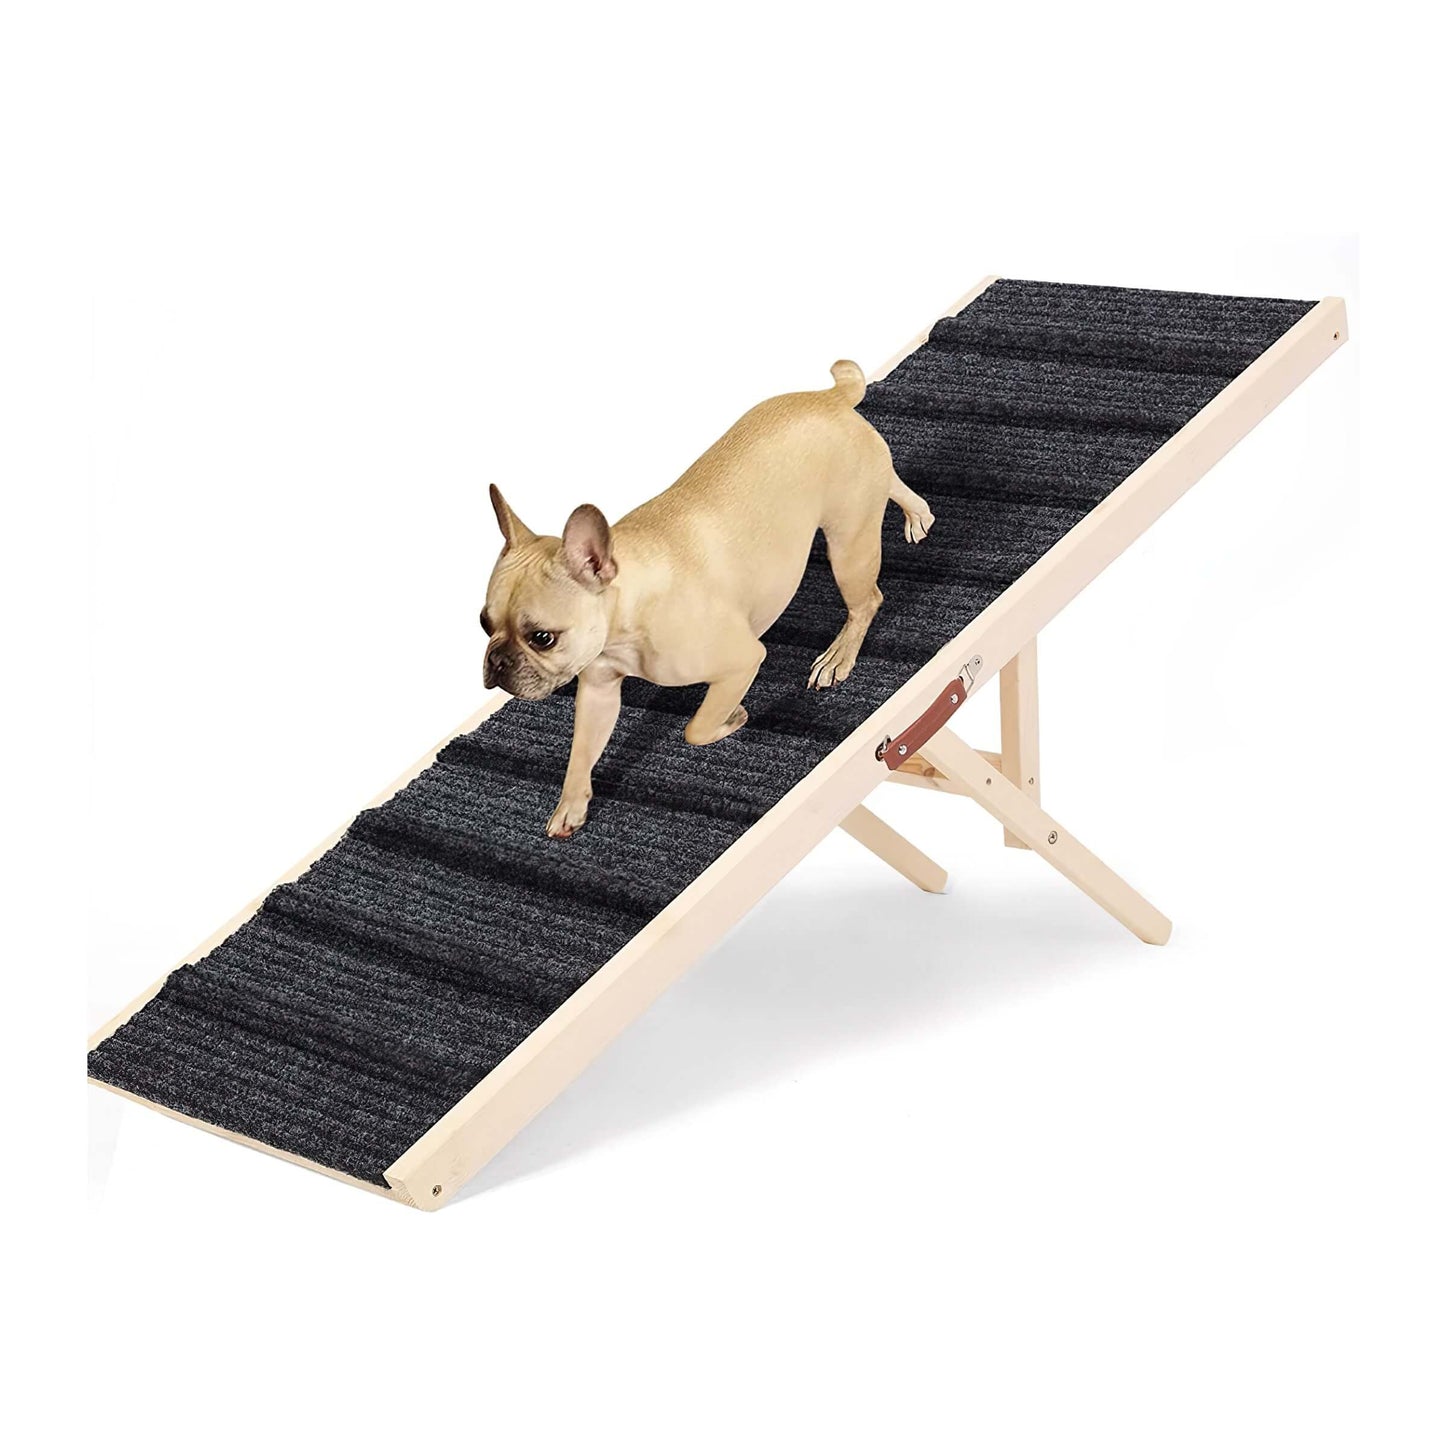 51.1" x 17" Premium Quality Dog Ramp for Bed and Car Heavy Duty Wood Petramp Stairs, Doggy Steps for Tall High Bed